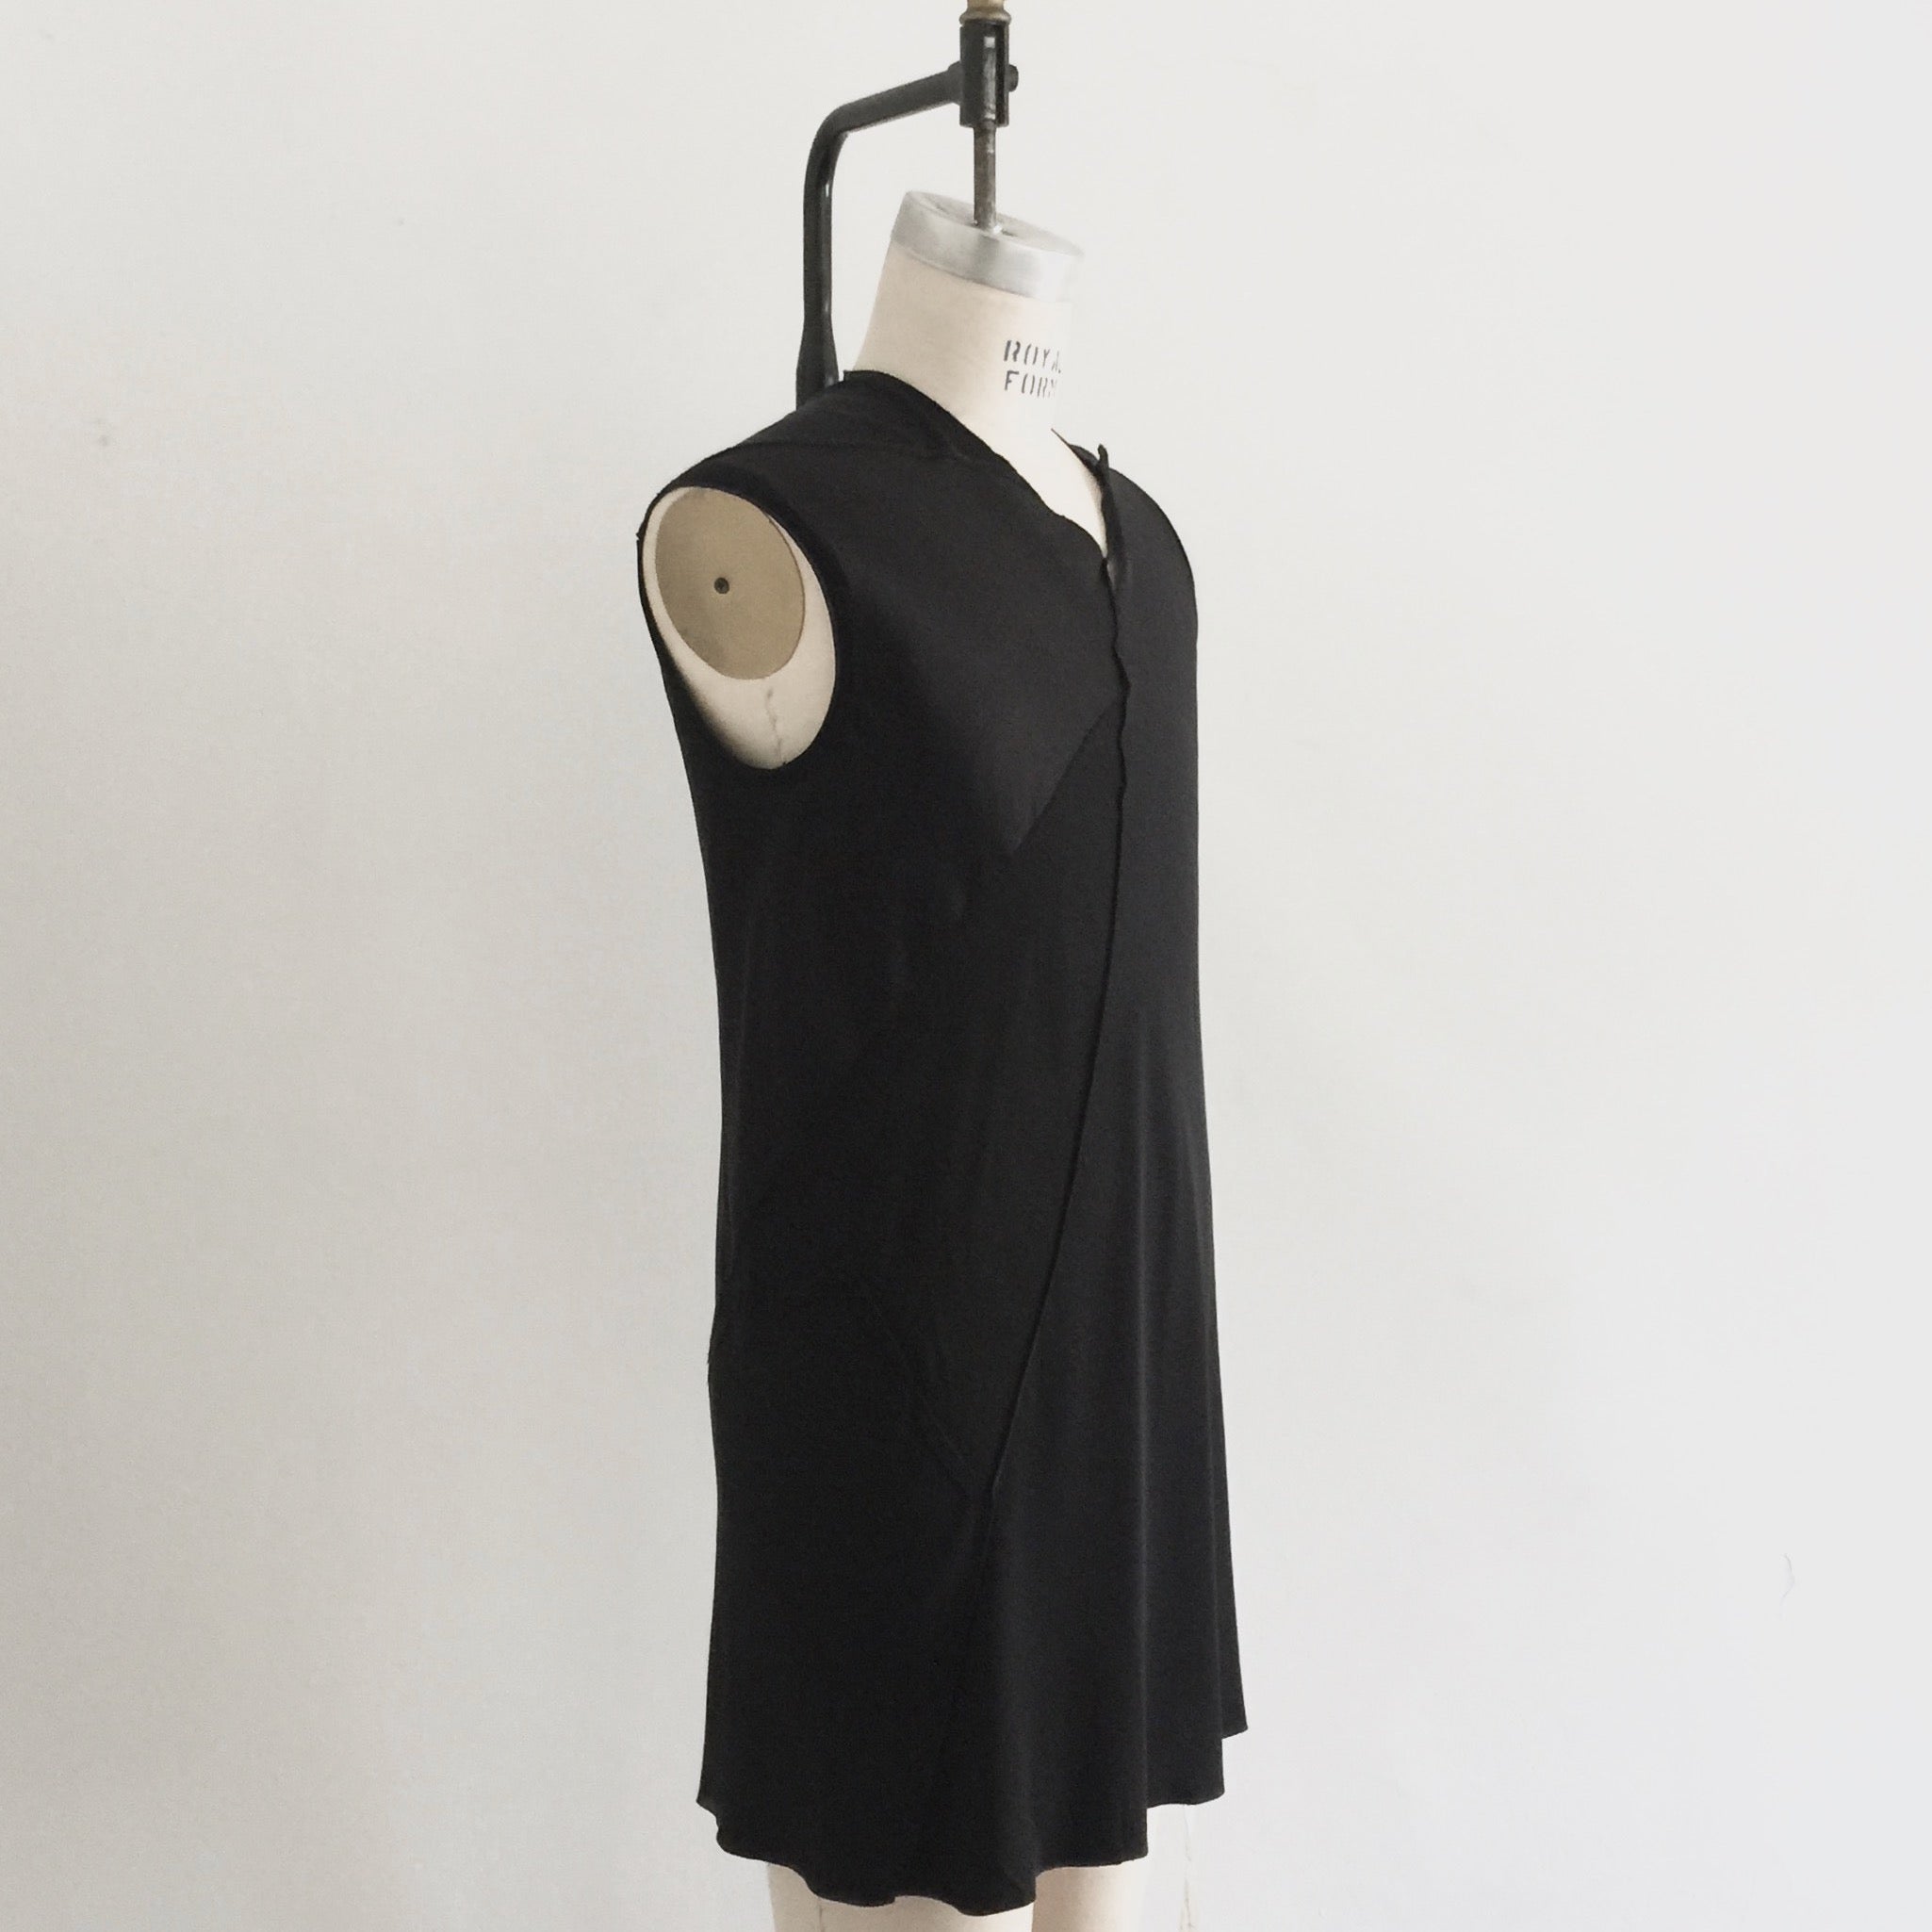 agender | kammacloth...one of a kind...medium, uni-spiral sleeveless tunic... ready to buy